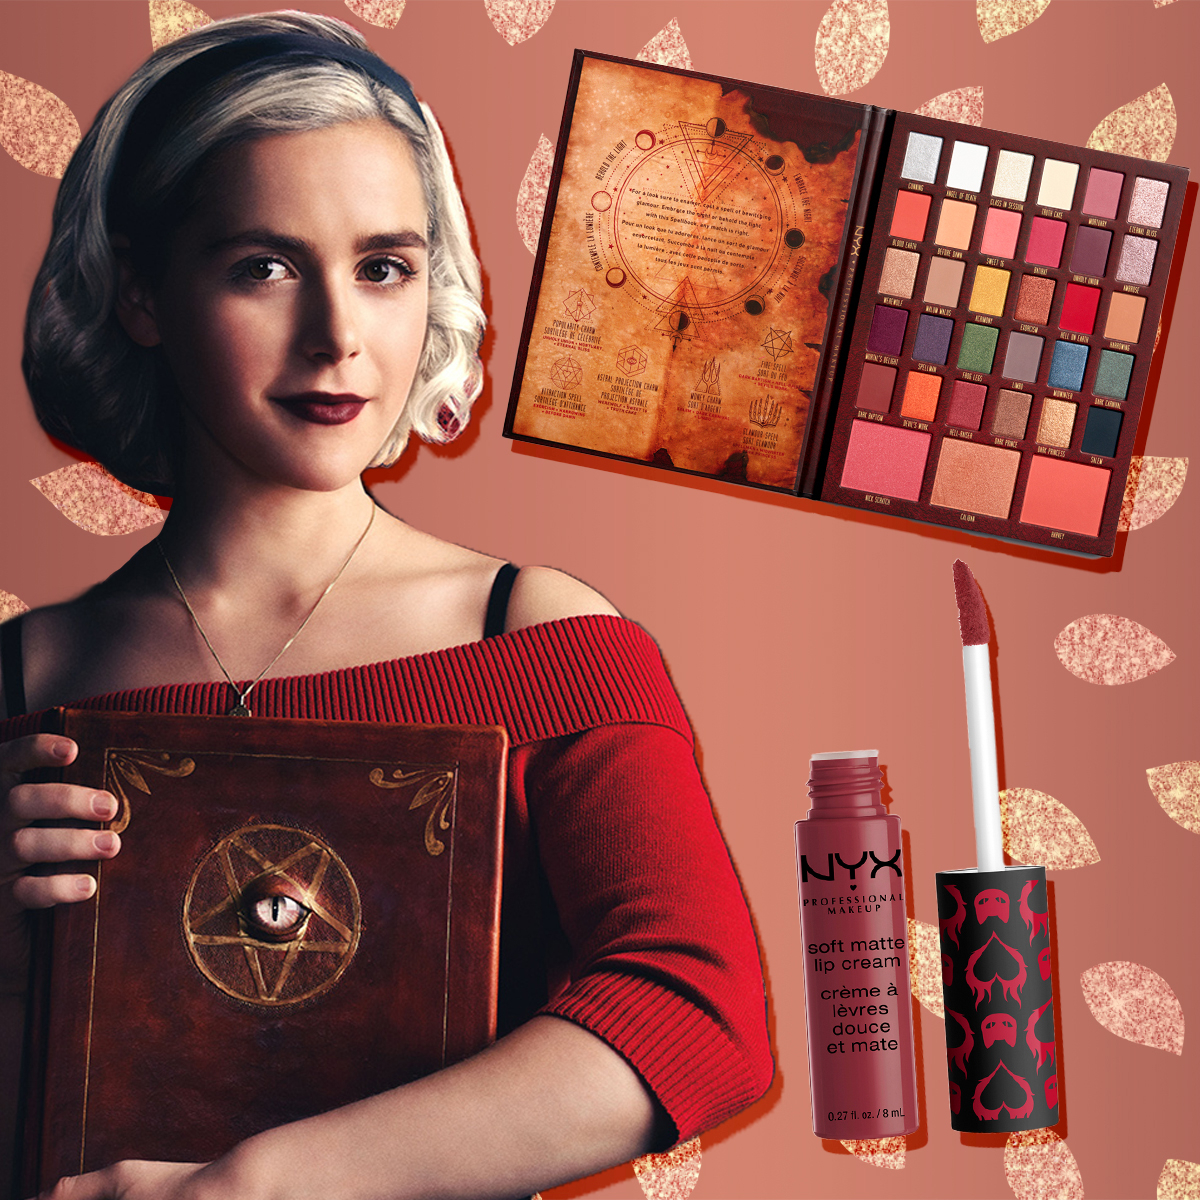 Nyx S Chilling Adventures Of Sabrina Makeup Is Back Today Only E Online